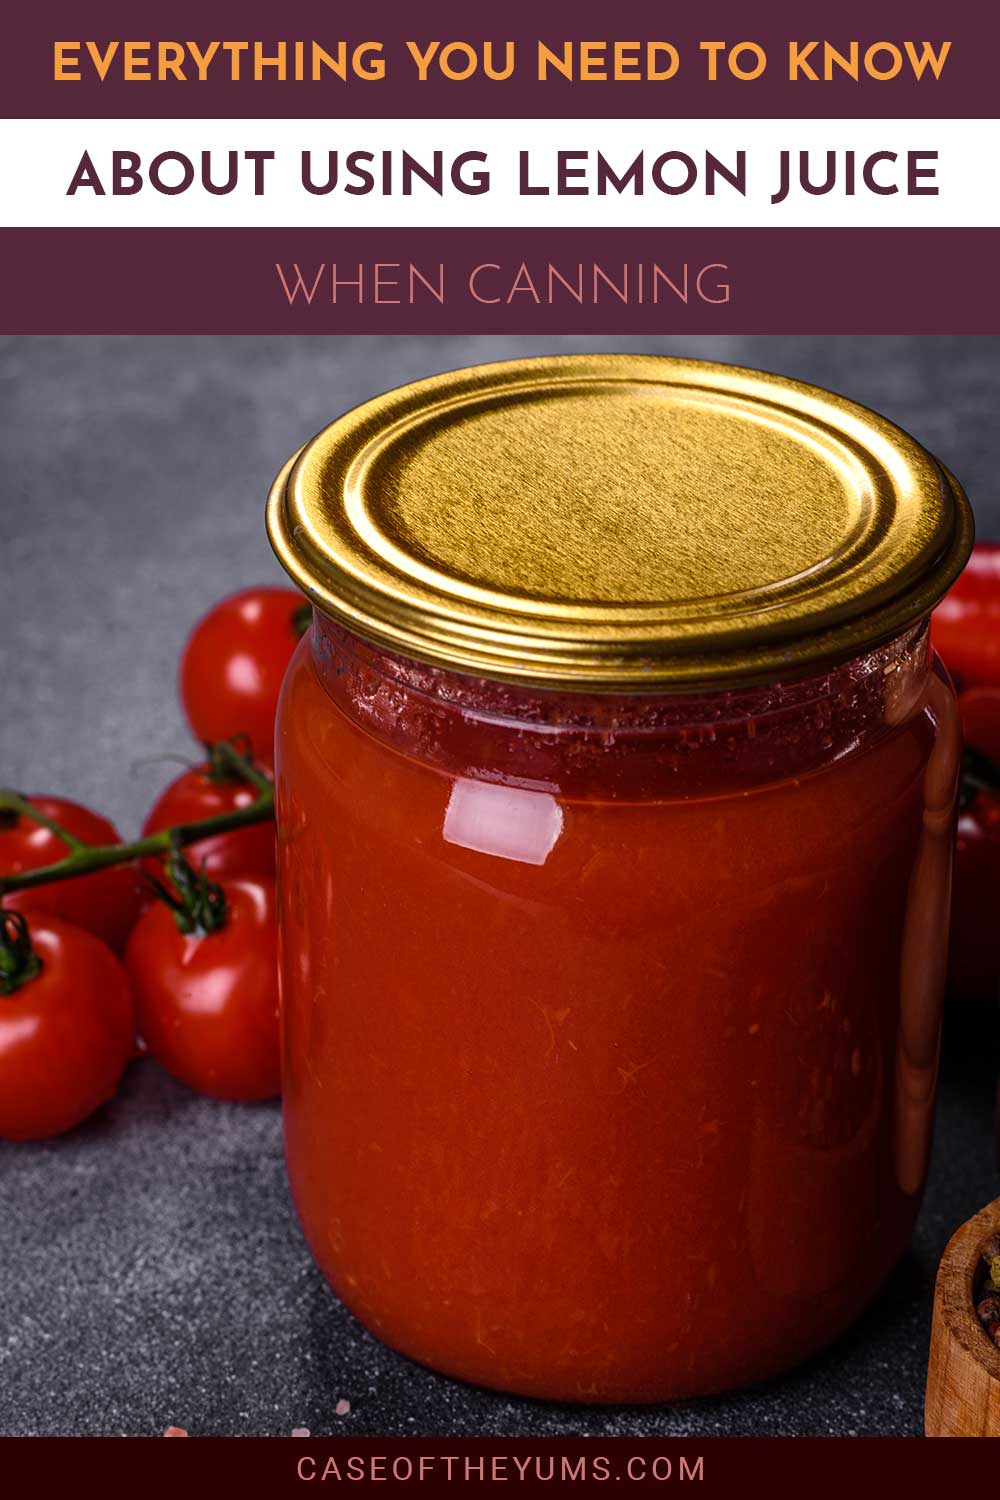 Canned tomato in front of fresh tomatoes on a surface - Everything You Need to Know About Using Lemon Juice When Canning